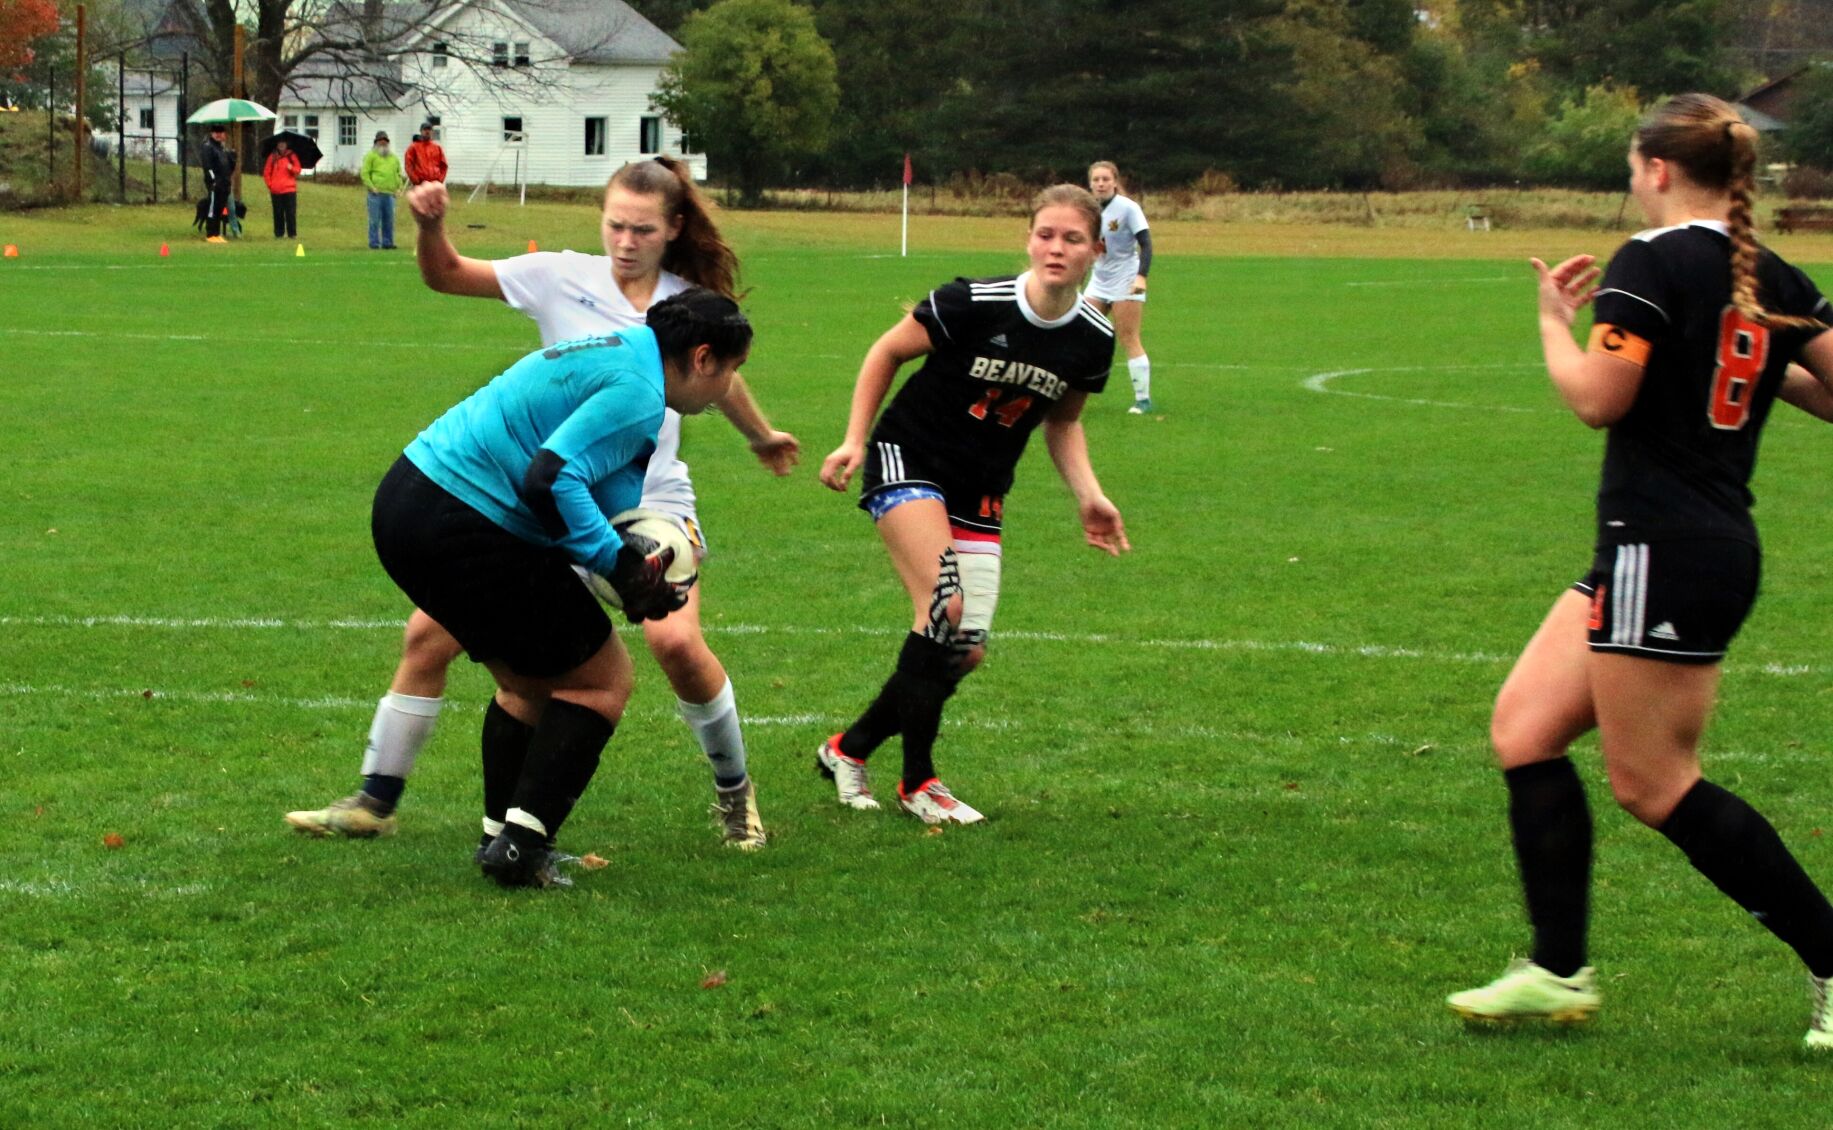 Boquet Valley, Chazy, Seton Catholic, and Crown Point advance to semis in Section VII Class D girls’ soccer tournament